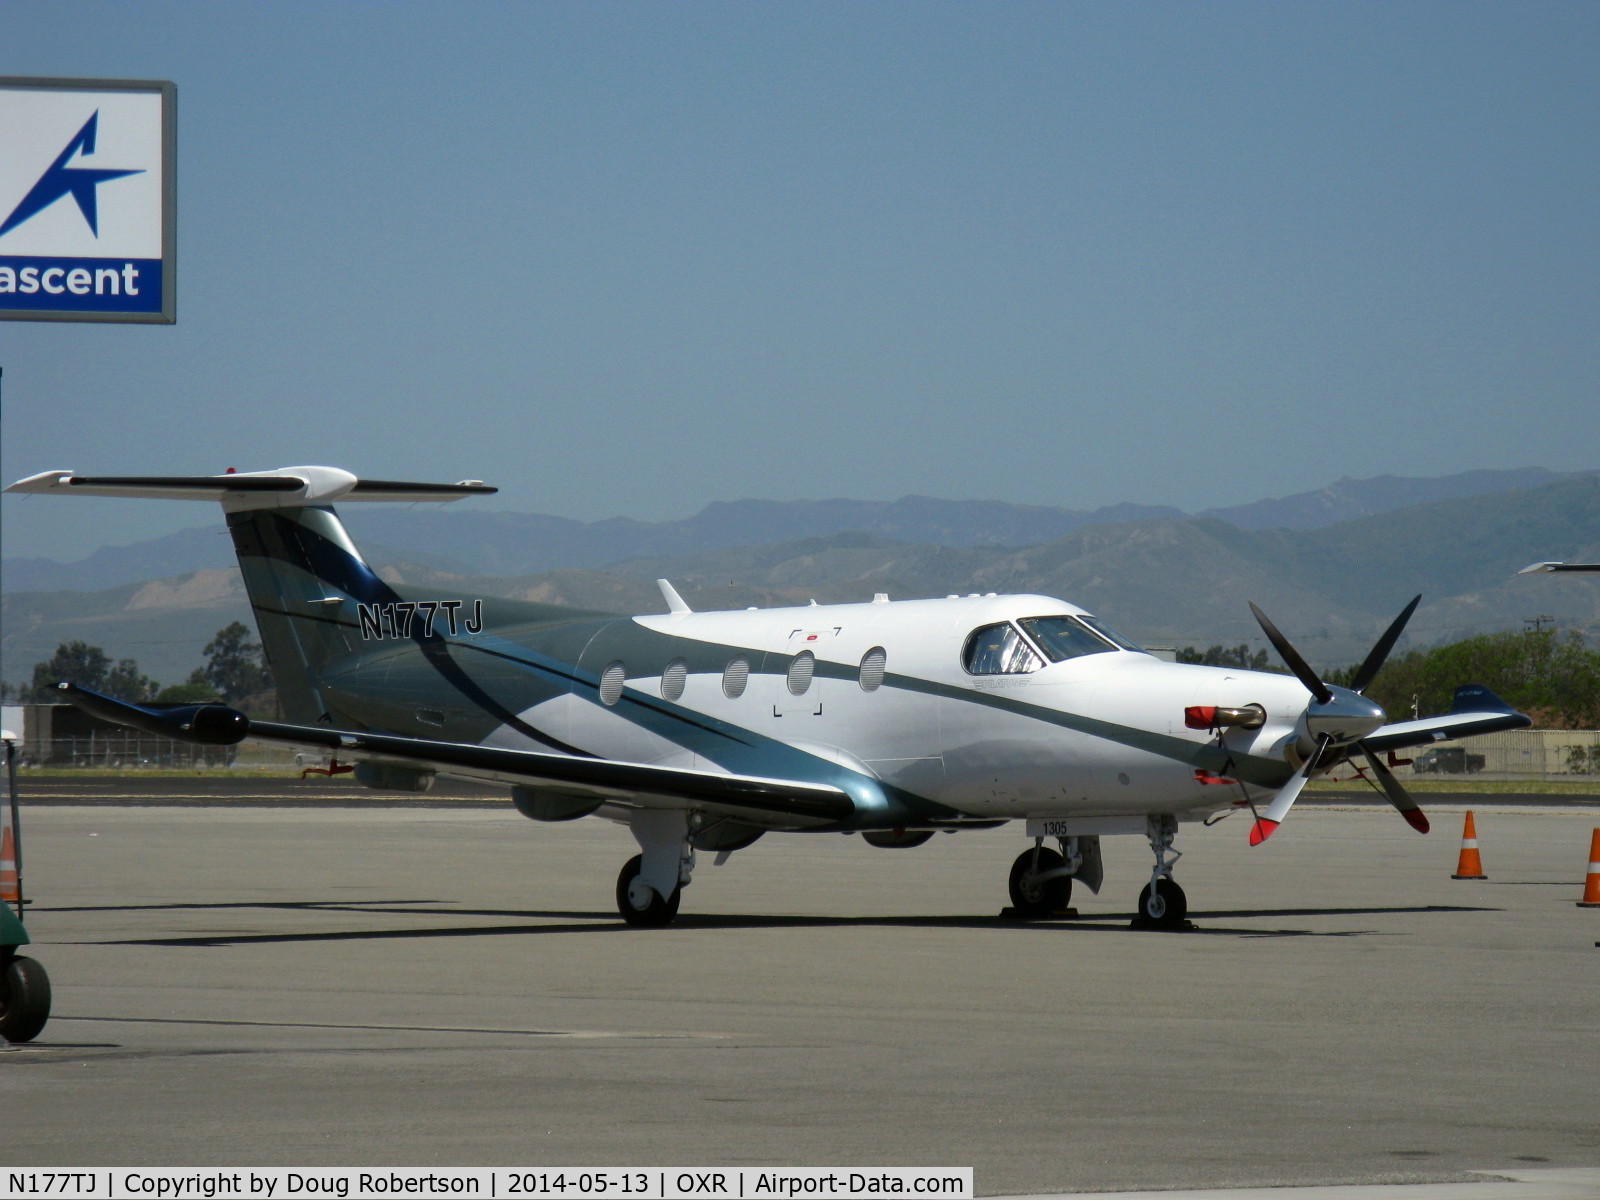 N177TJ, 2011 Pilatus PC-12/47E C/N 1305, 2011 Pilatus PC-12/47E, P&W(C)PT6A-67P Turboprop, flat rated to 1,200 shp for TO, 1,000 shp for cruise, pressurized